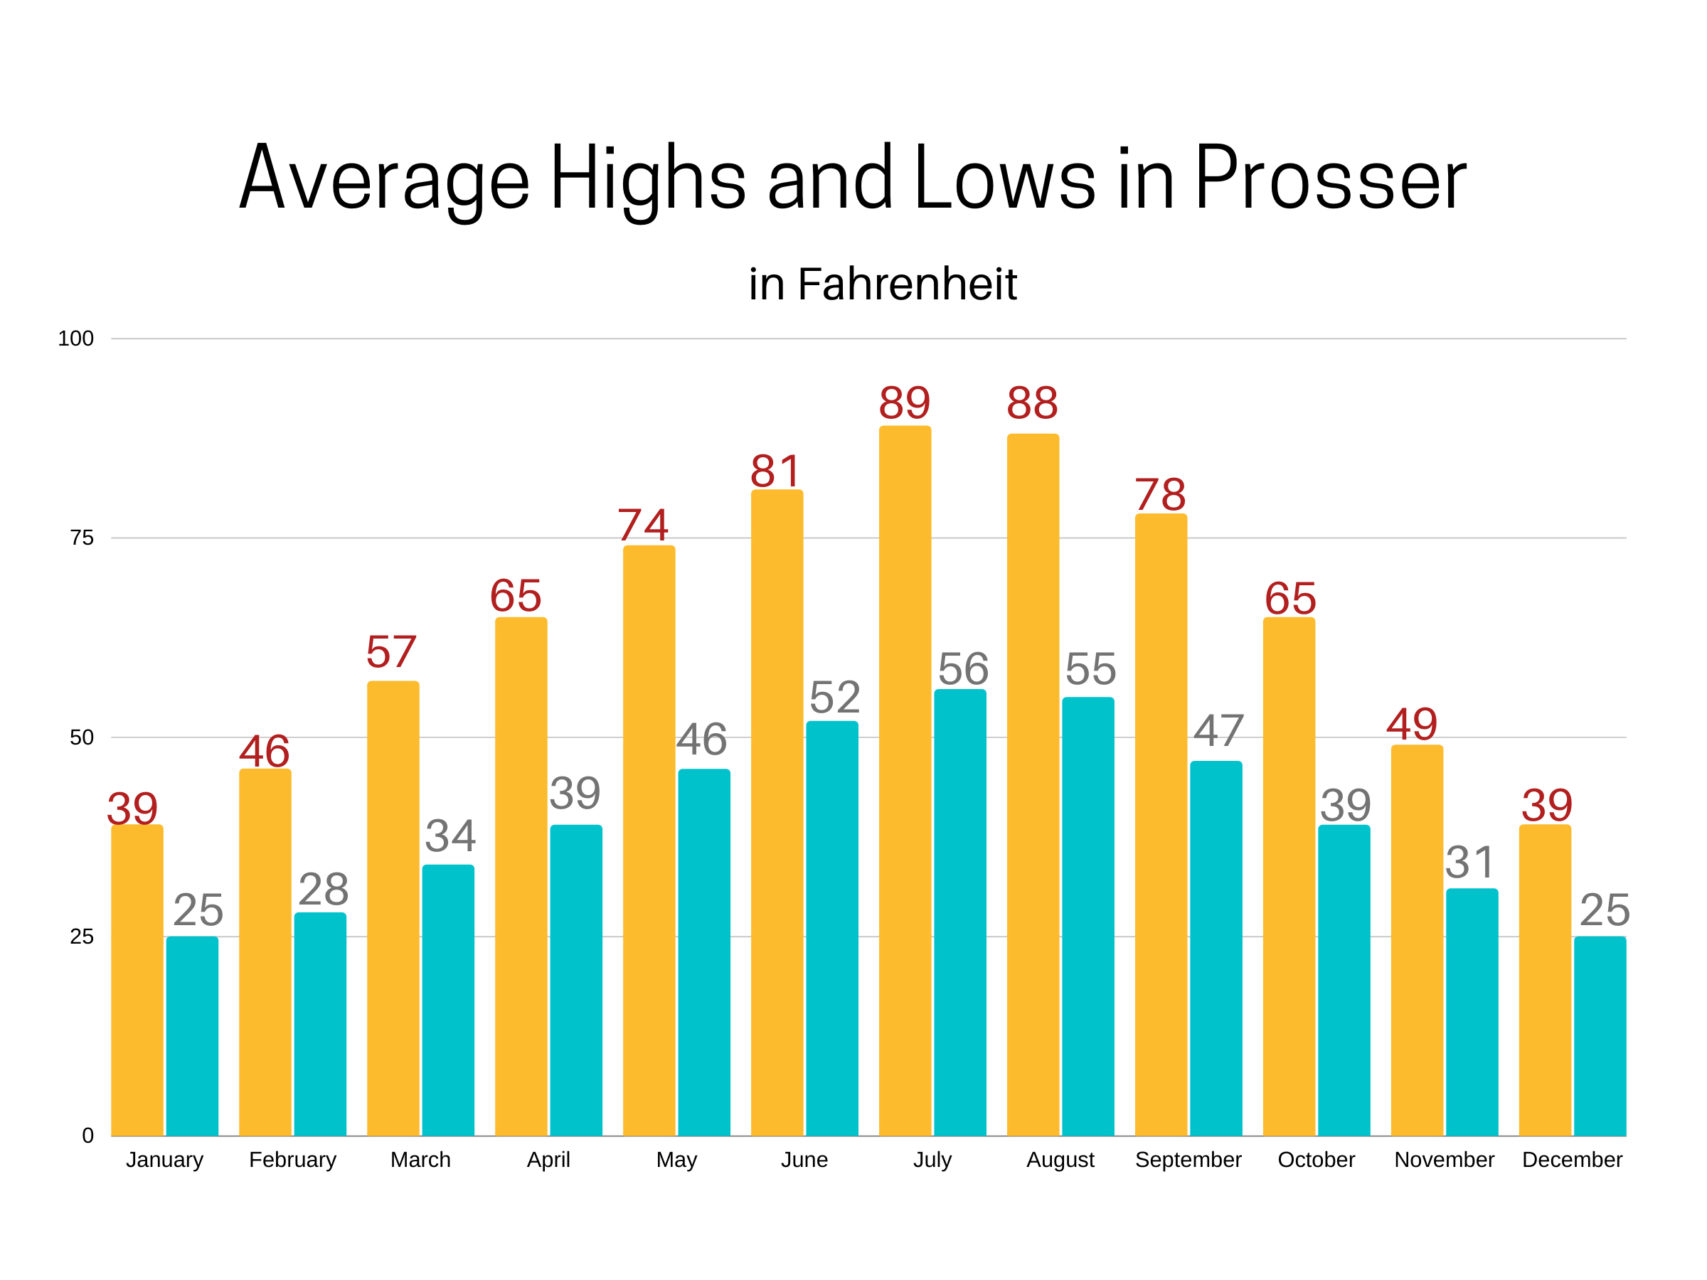 Average high and low temperatures in Prosser, WA.